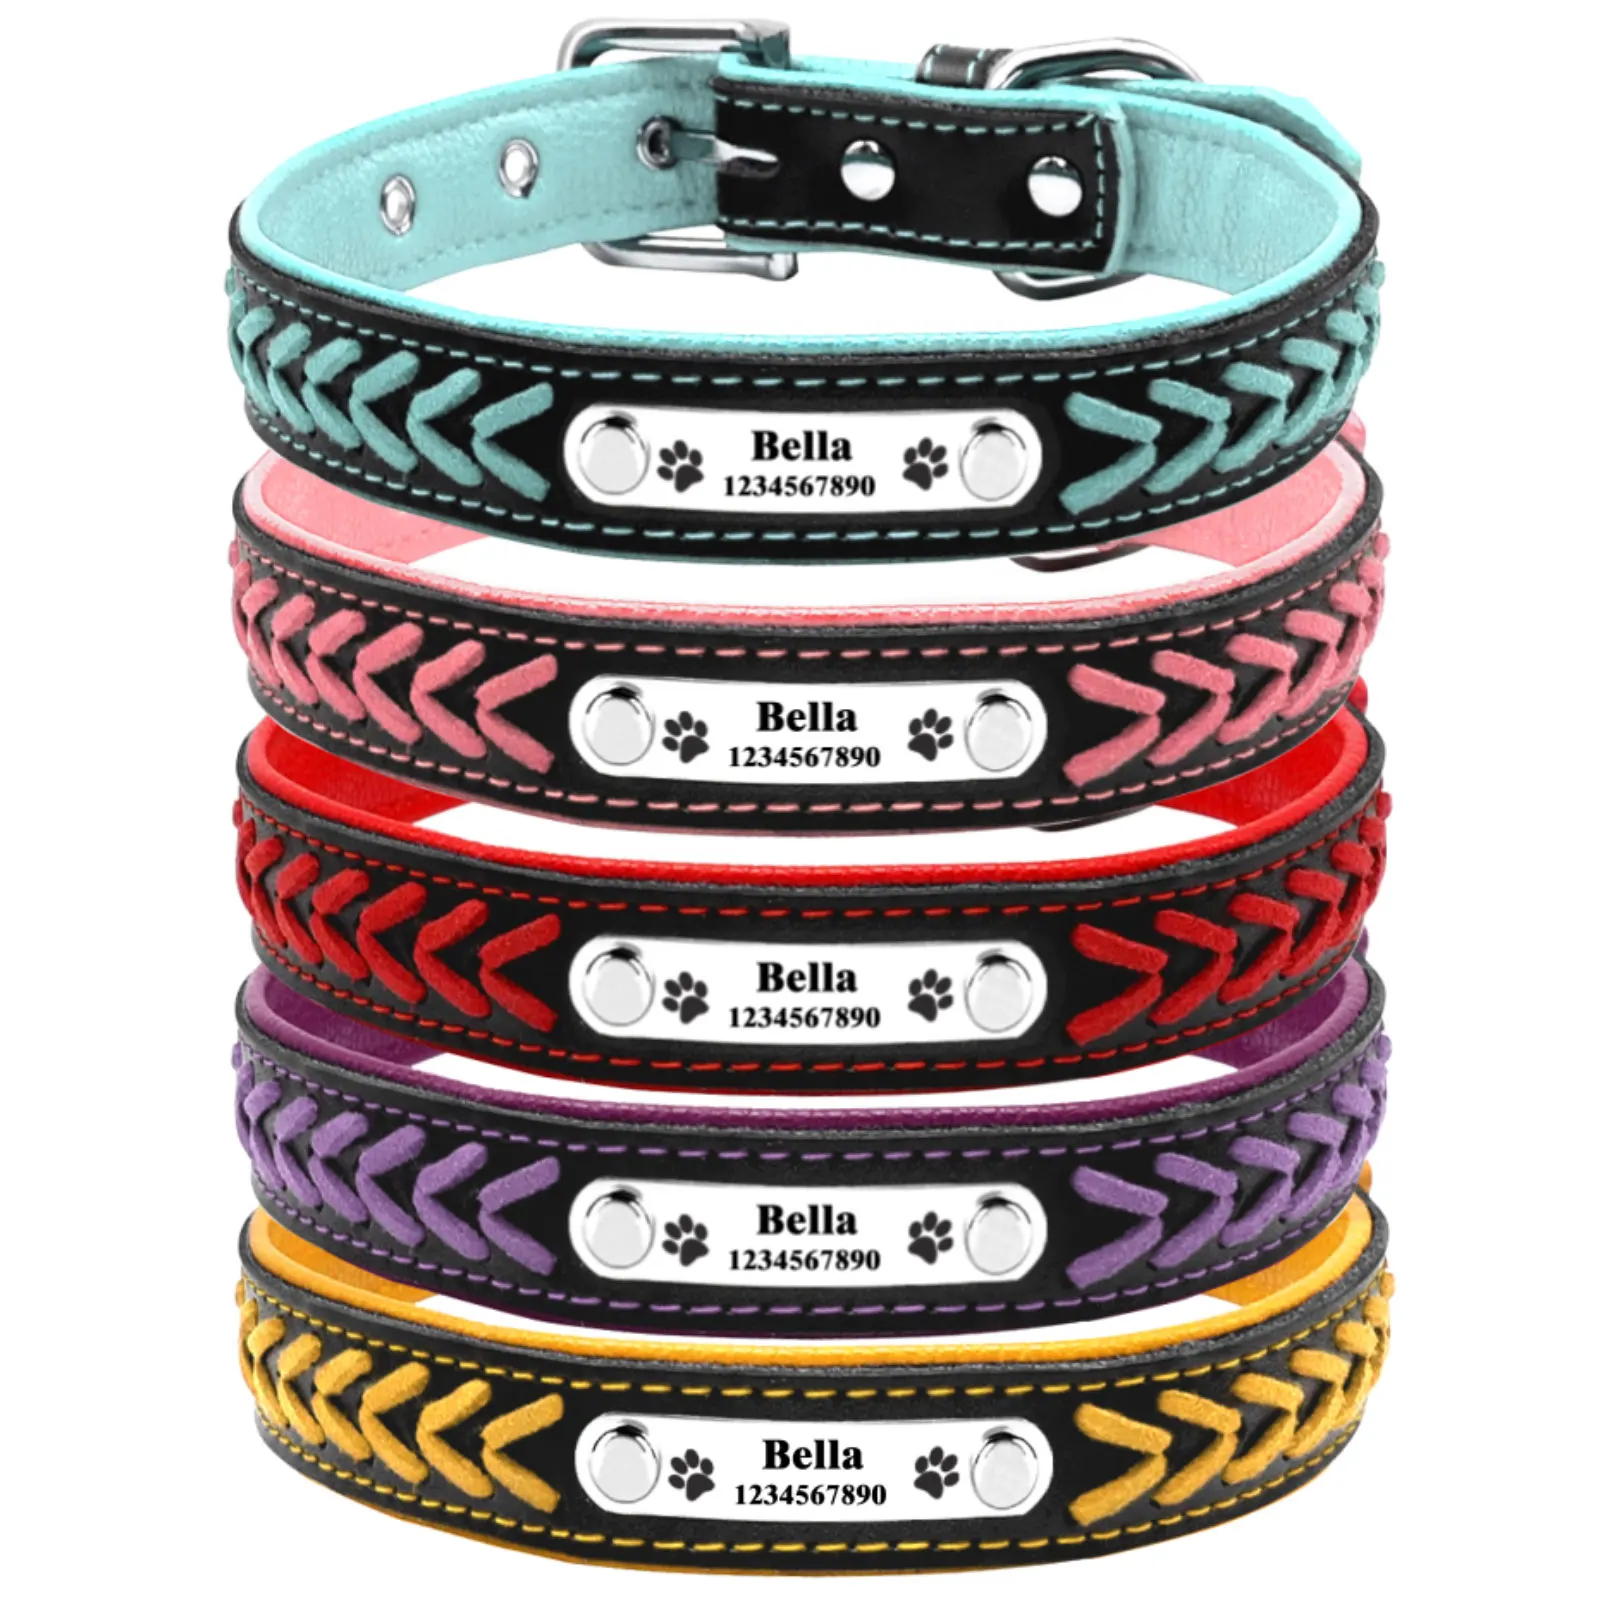 

Personalized Dog Collar Leather Padded Dogs Braided Collars Free Engraving Pet ID Tag Nameplate for Small Medium Large Dogs